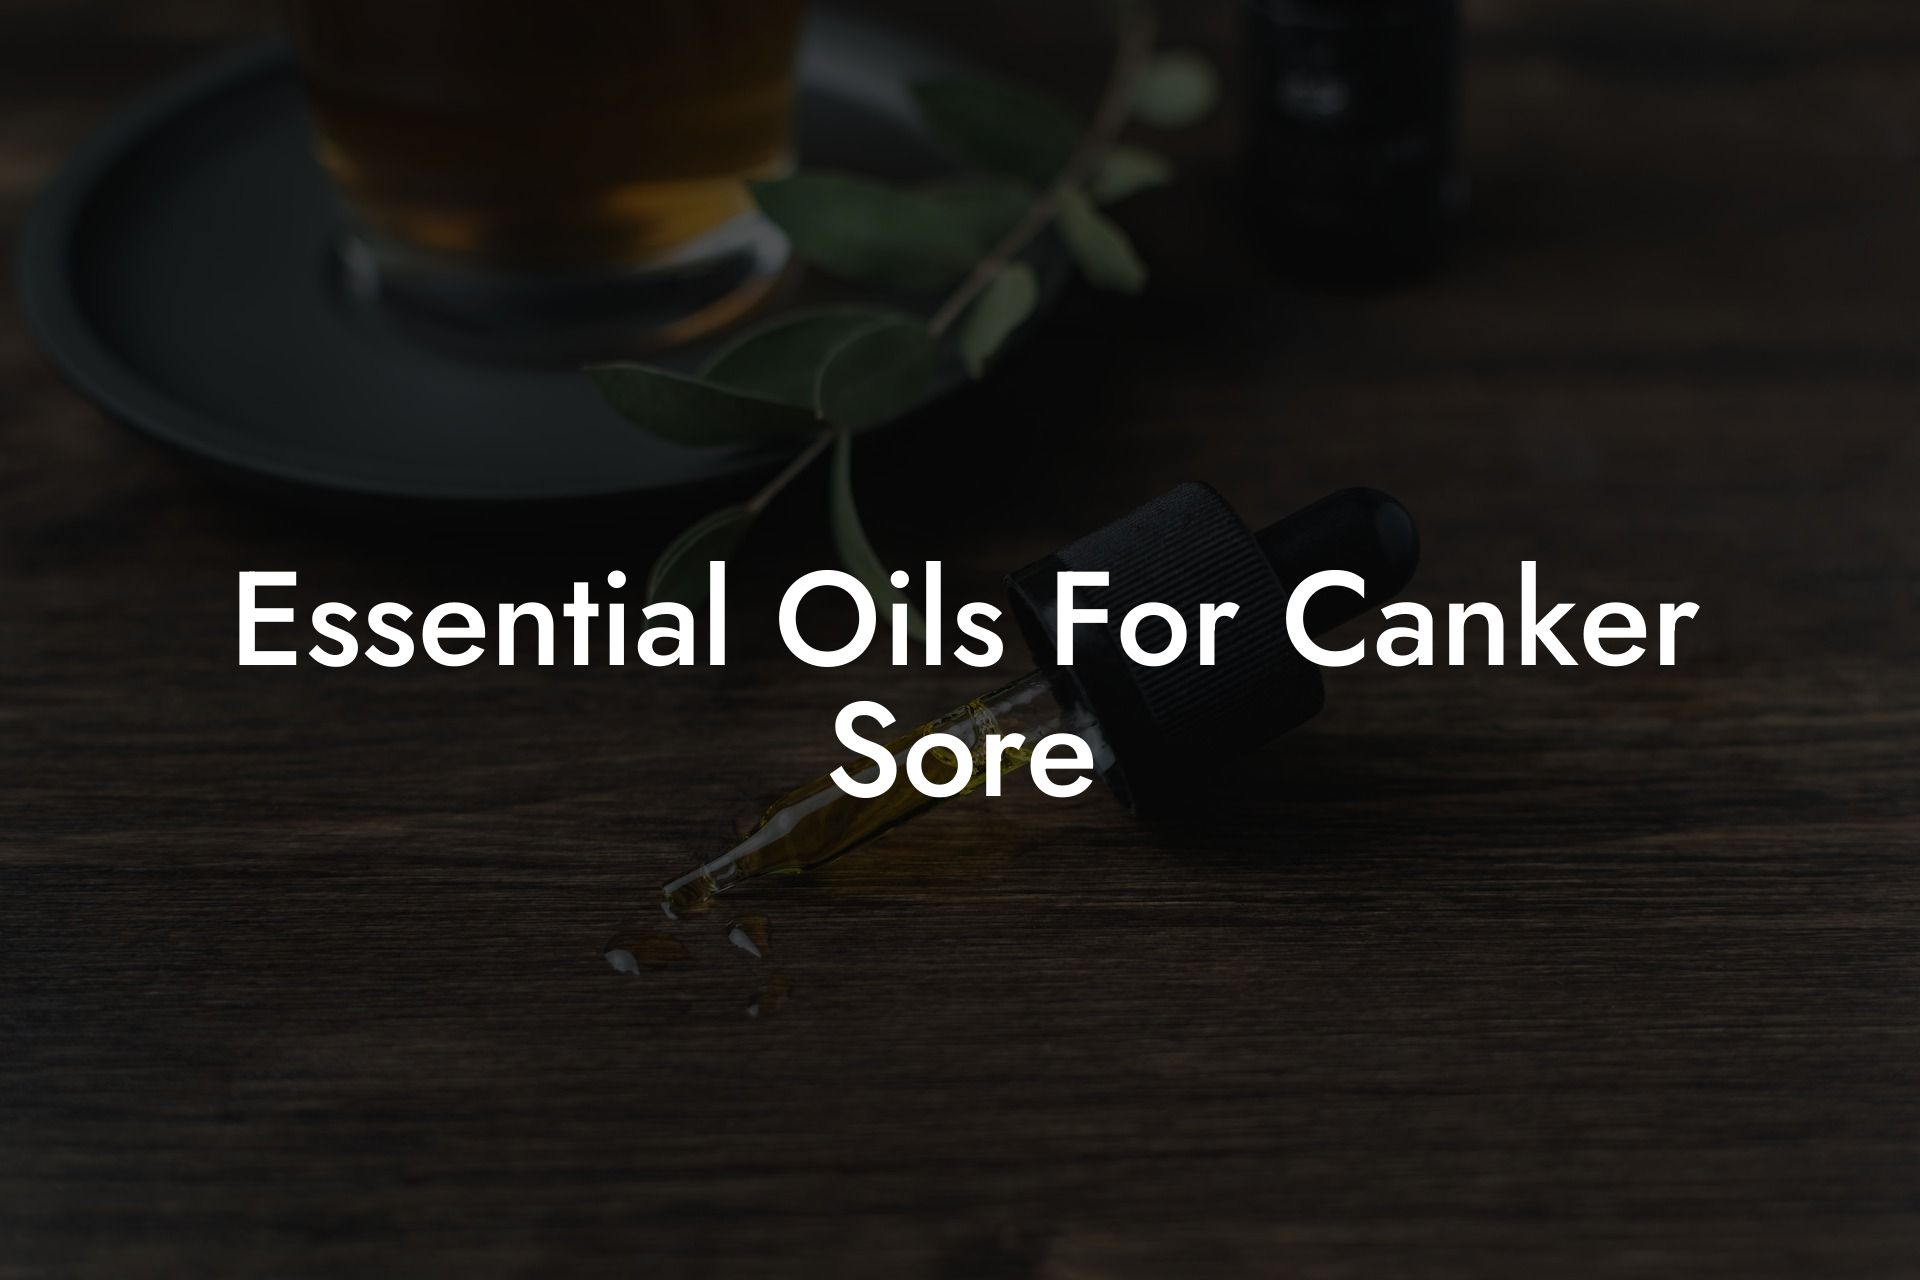 Essential Oils For Canker Sore